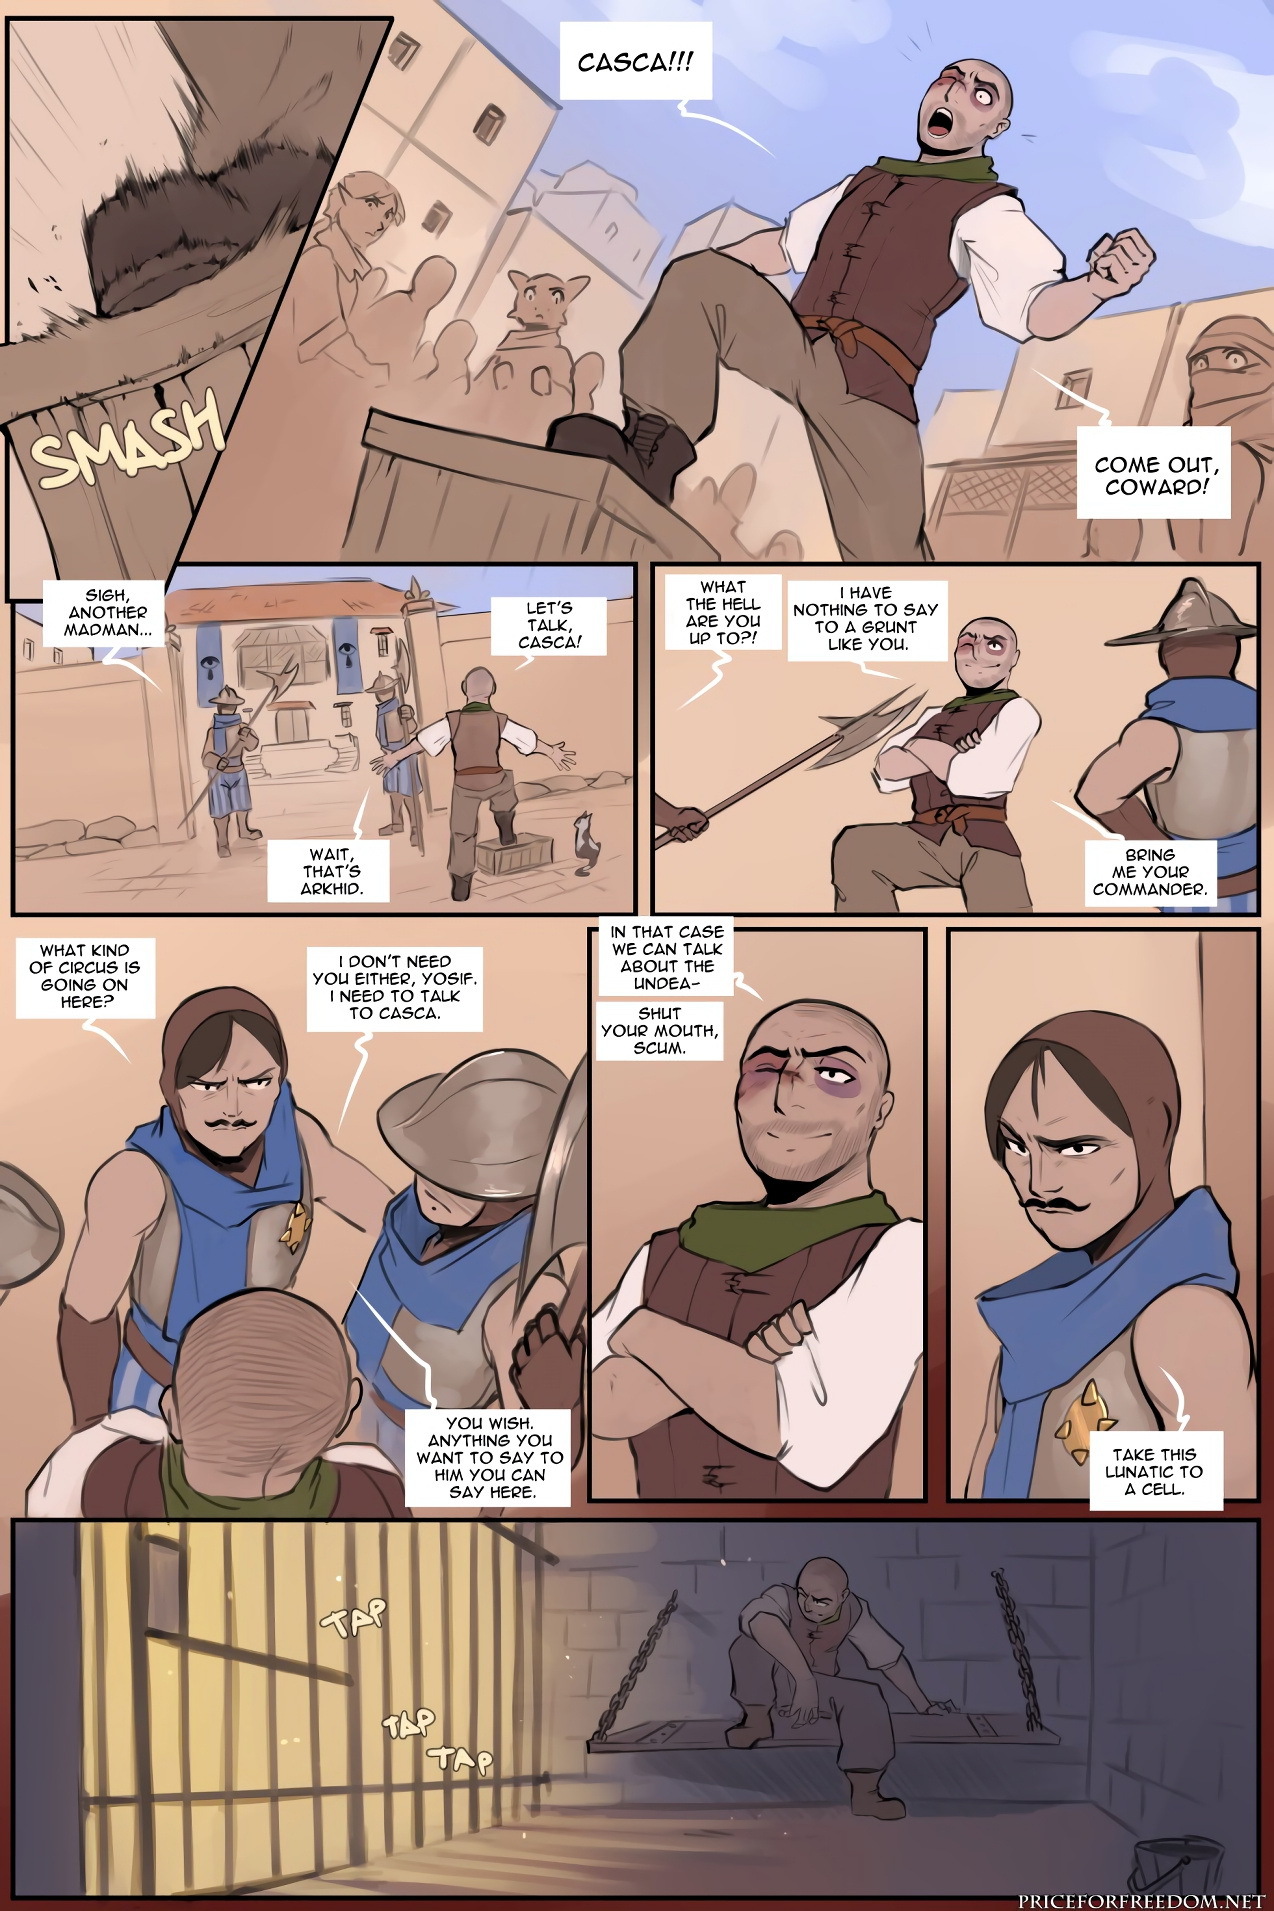 Price For Freedom - Page 370